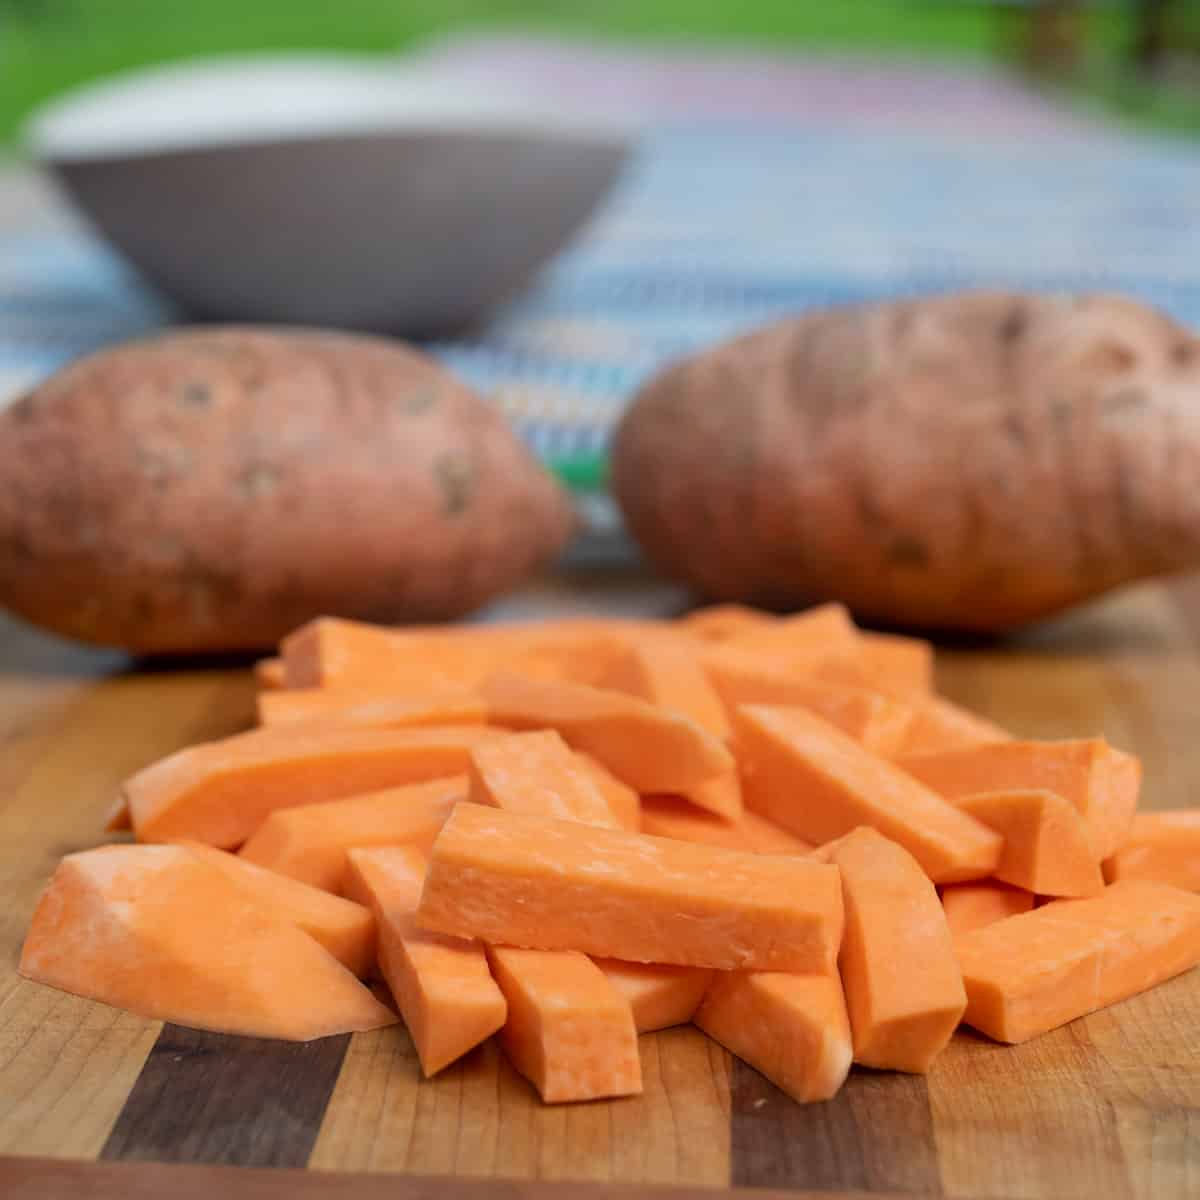 Sweet potato cut in to fat stick shapes with two whole potatoes in the background.